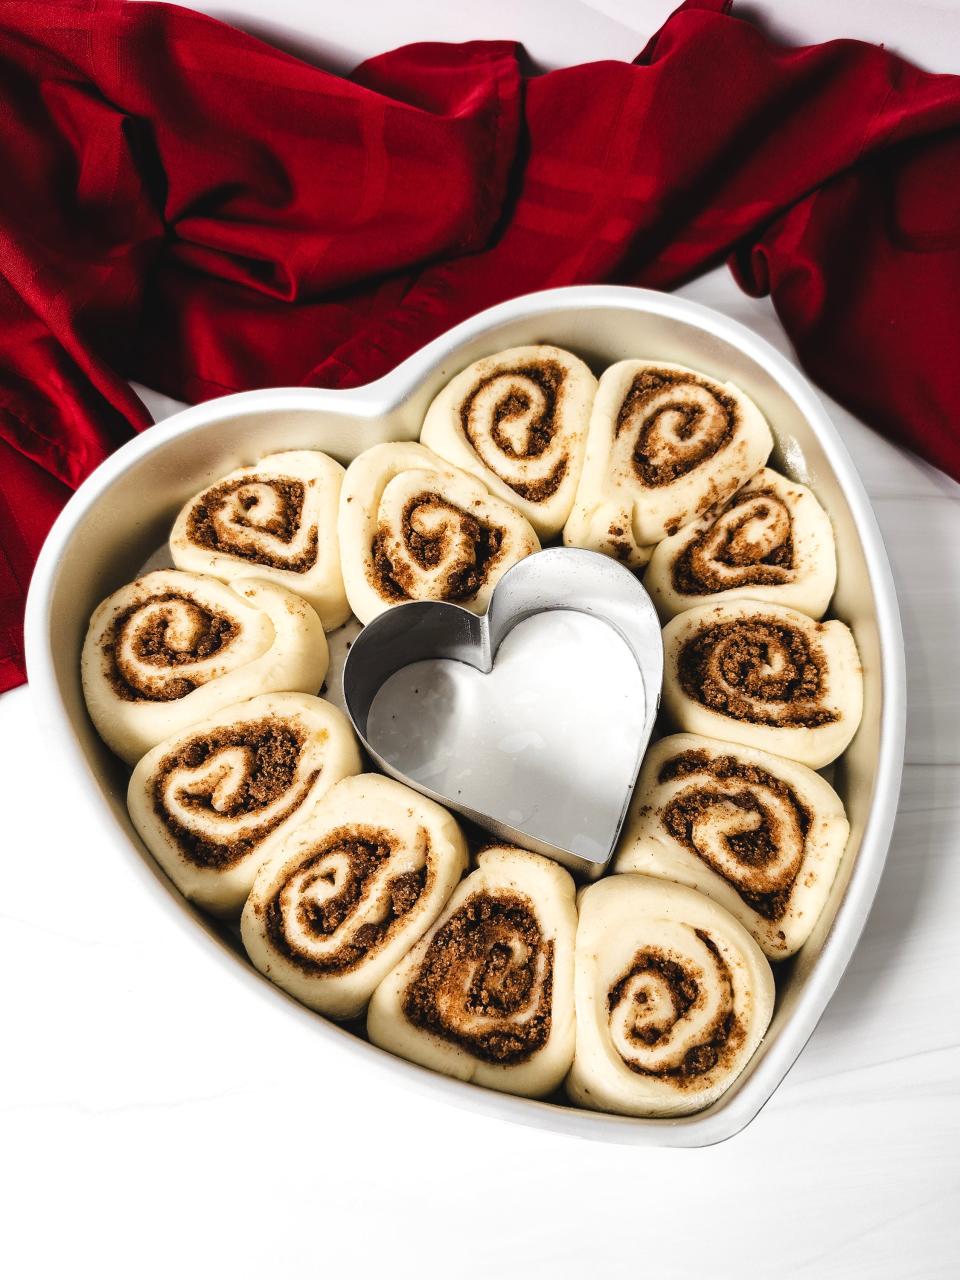 Cut the cinnamon-filled dough into cinnamon rolls and place in a heart-shaped pan to let the yeast work its magic.